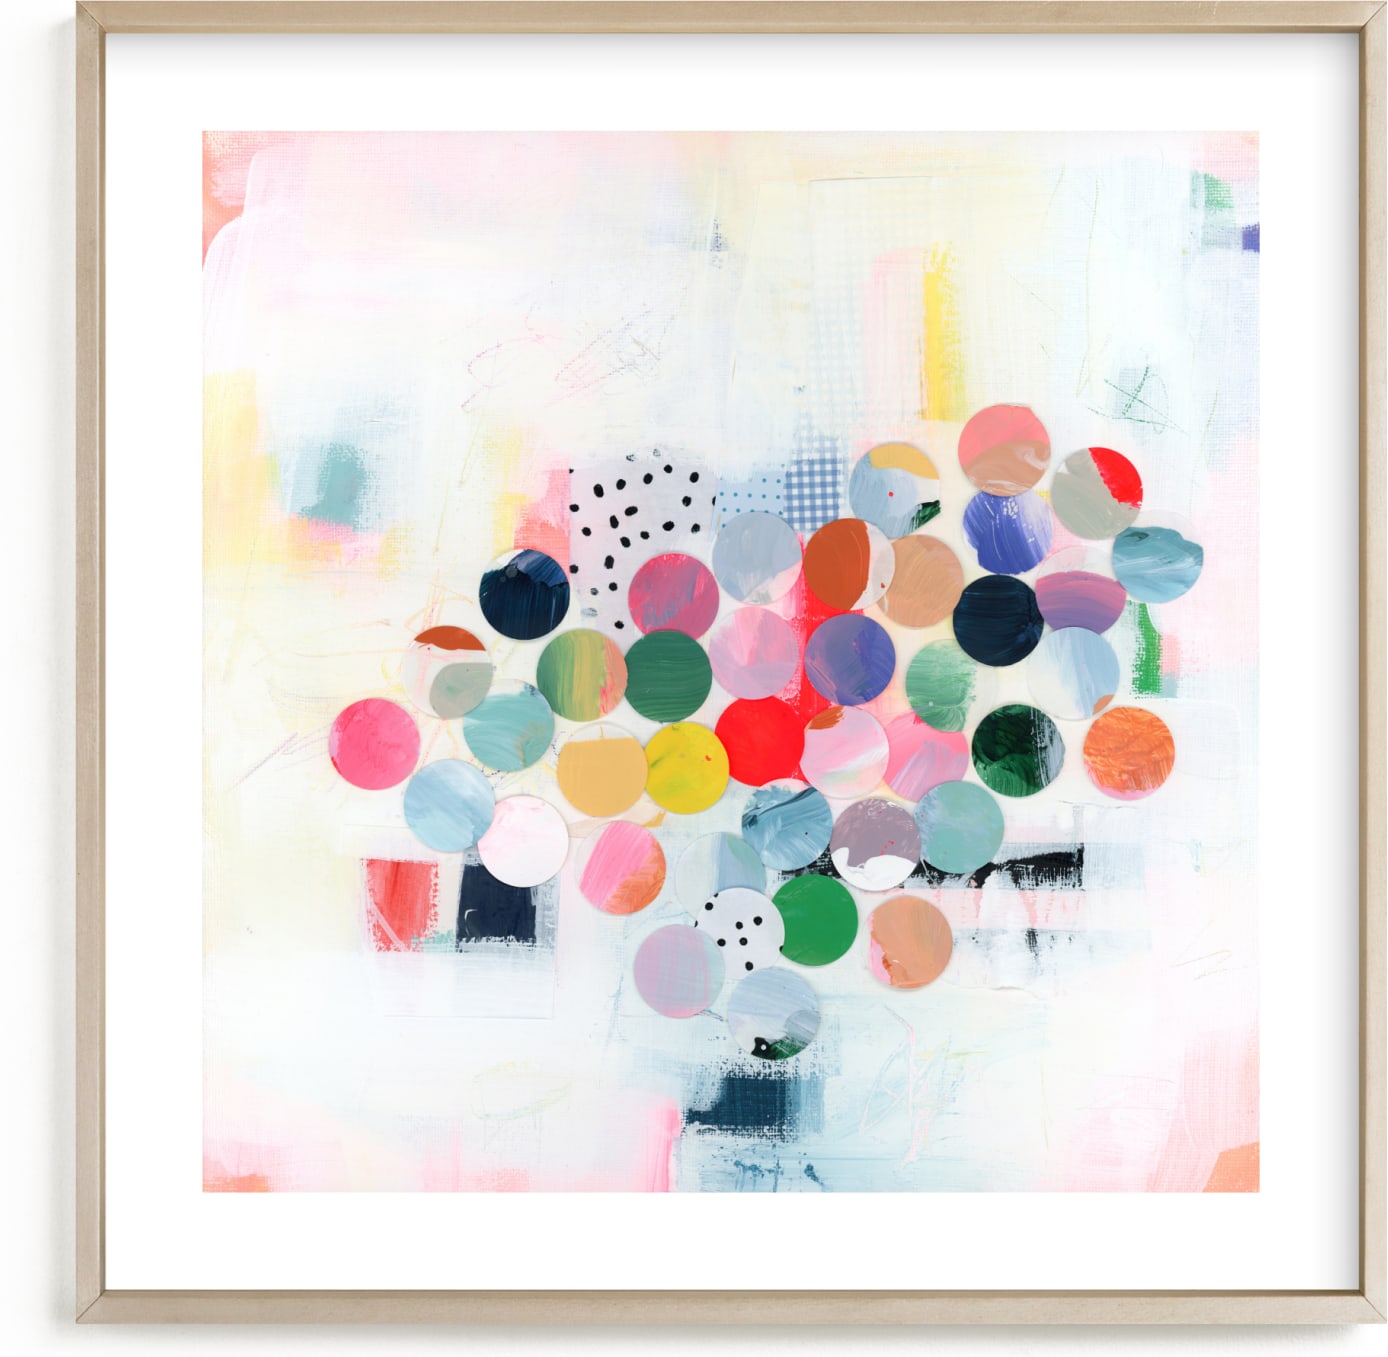 This is a colorful kids wall art by Lindsay Megahed called Fruit Punch.